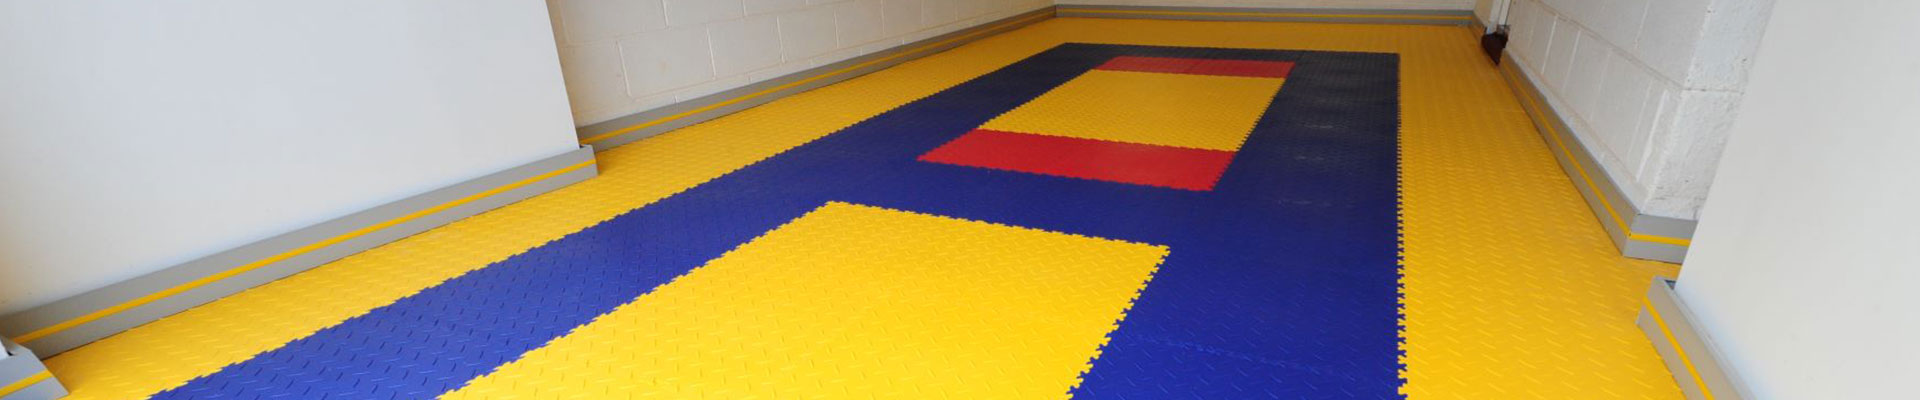 Add Some Colour To Your Garage Floor